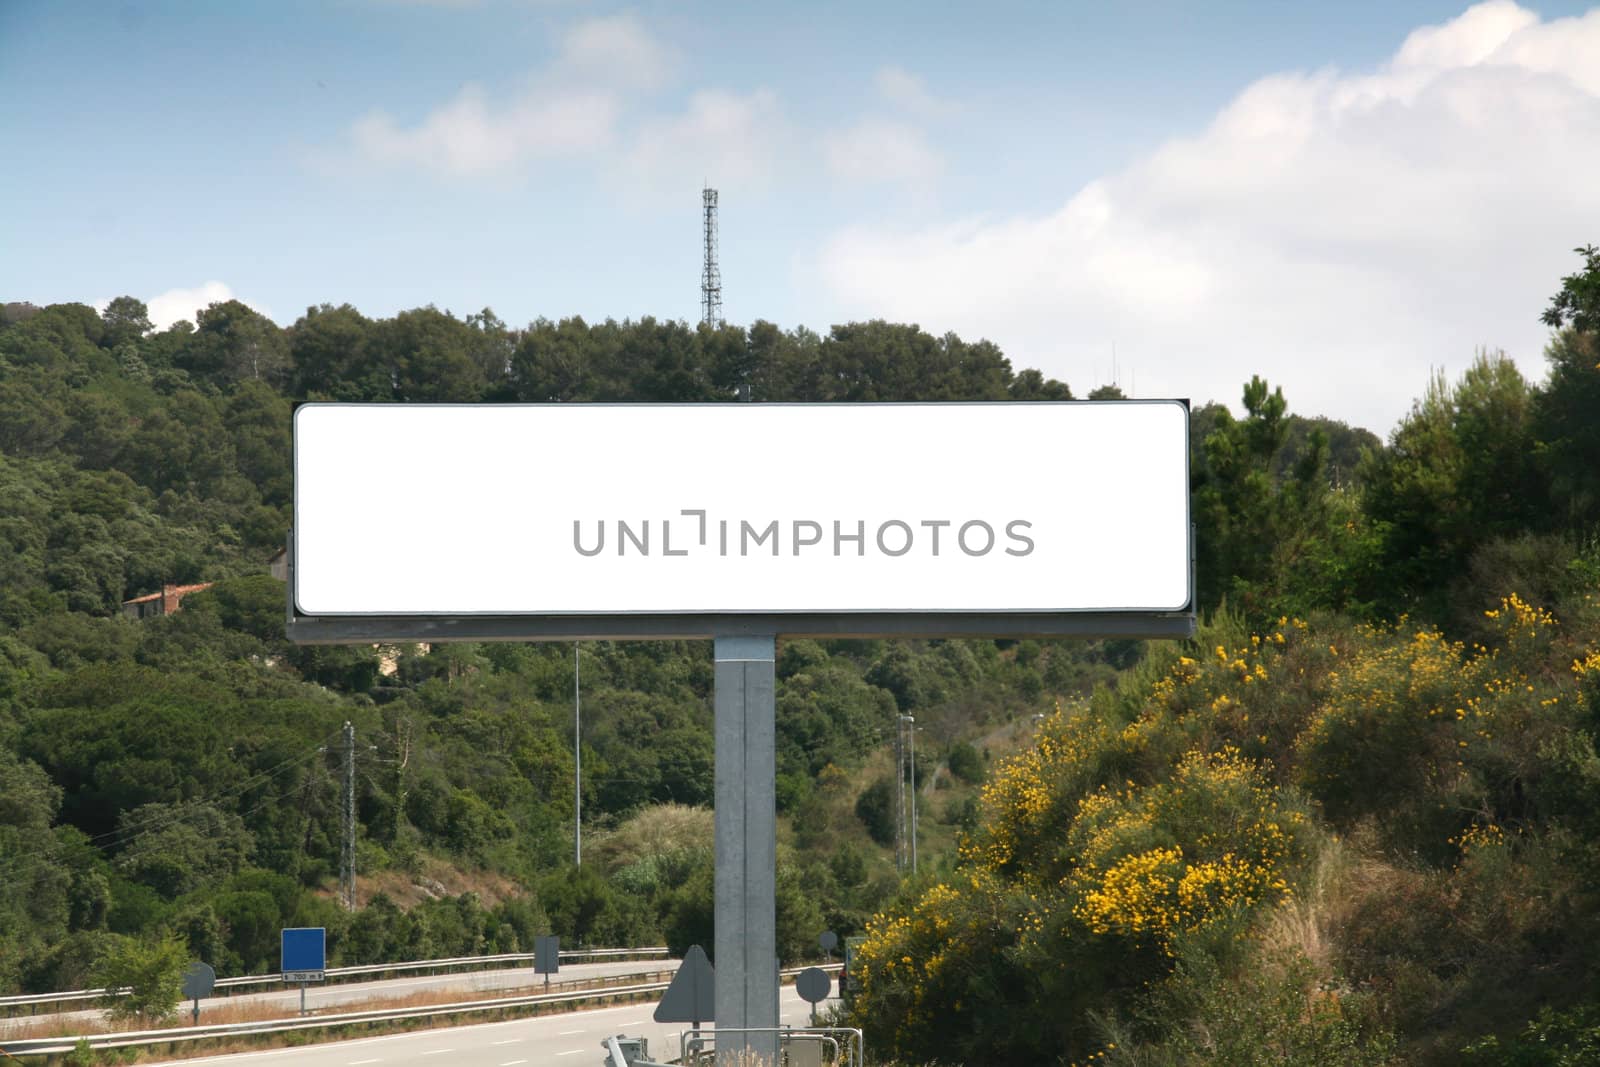 Outdoor advertising billboard, add your text or image on the empty space